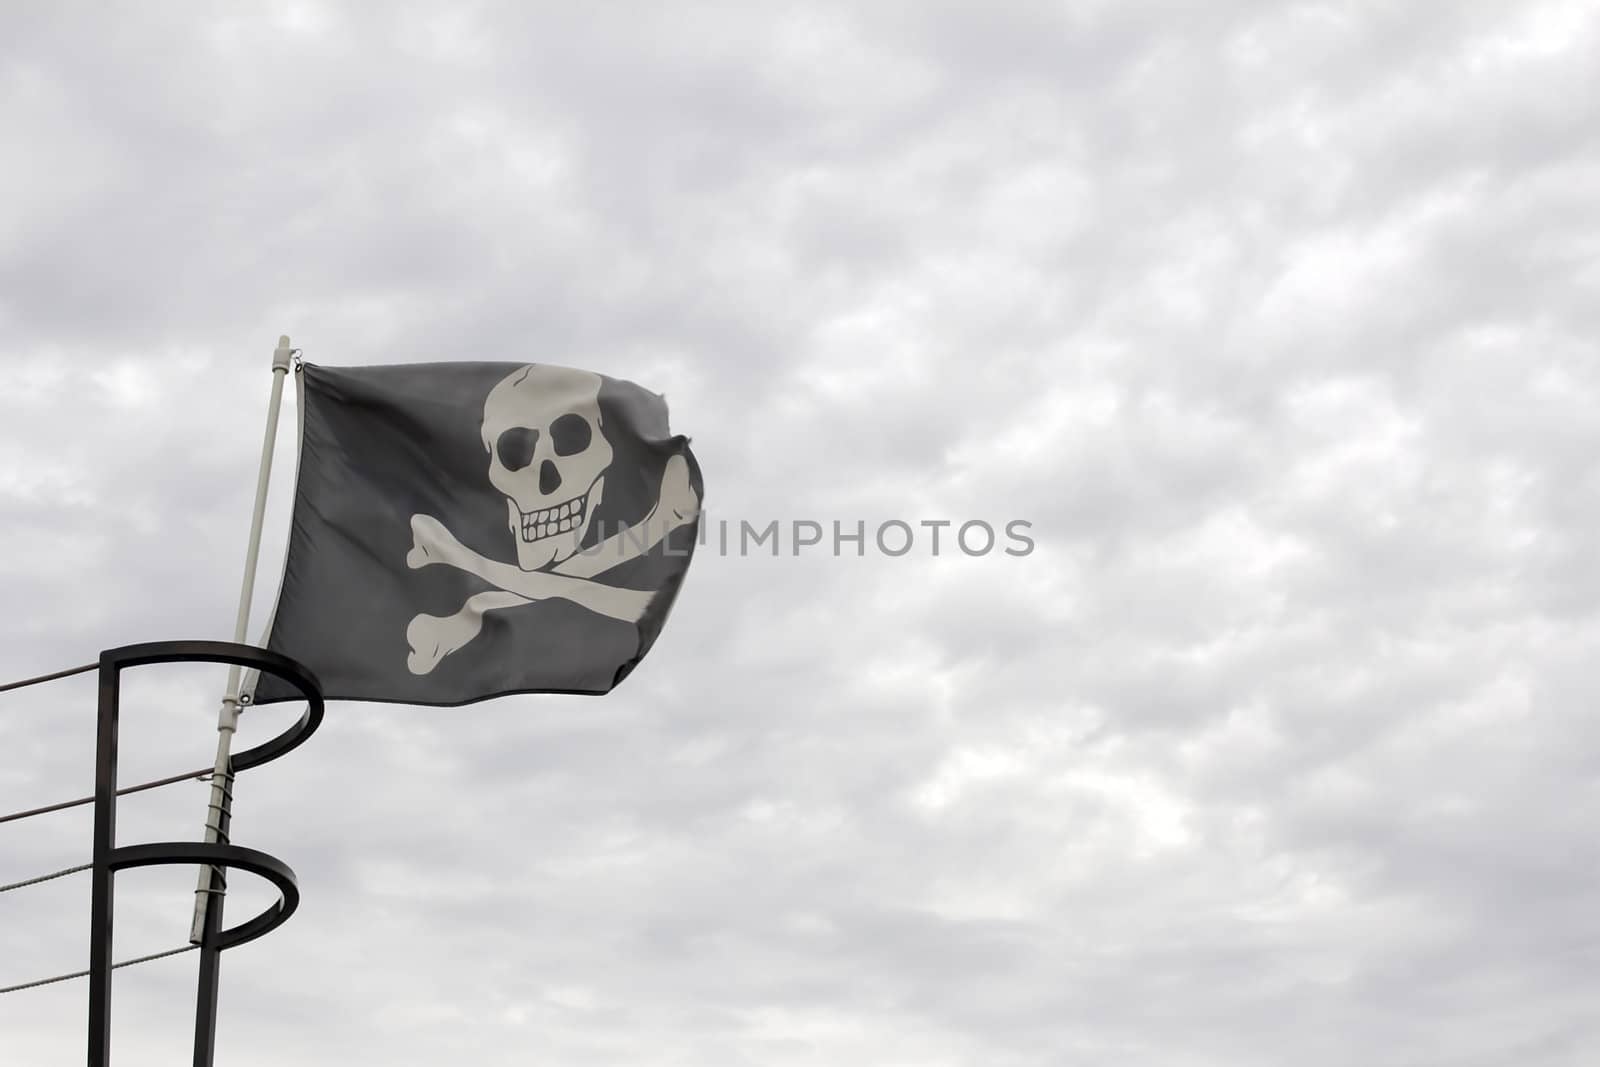 Pirate Ship Skull with Crossbone Flag by jpldesigns